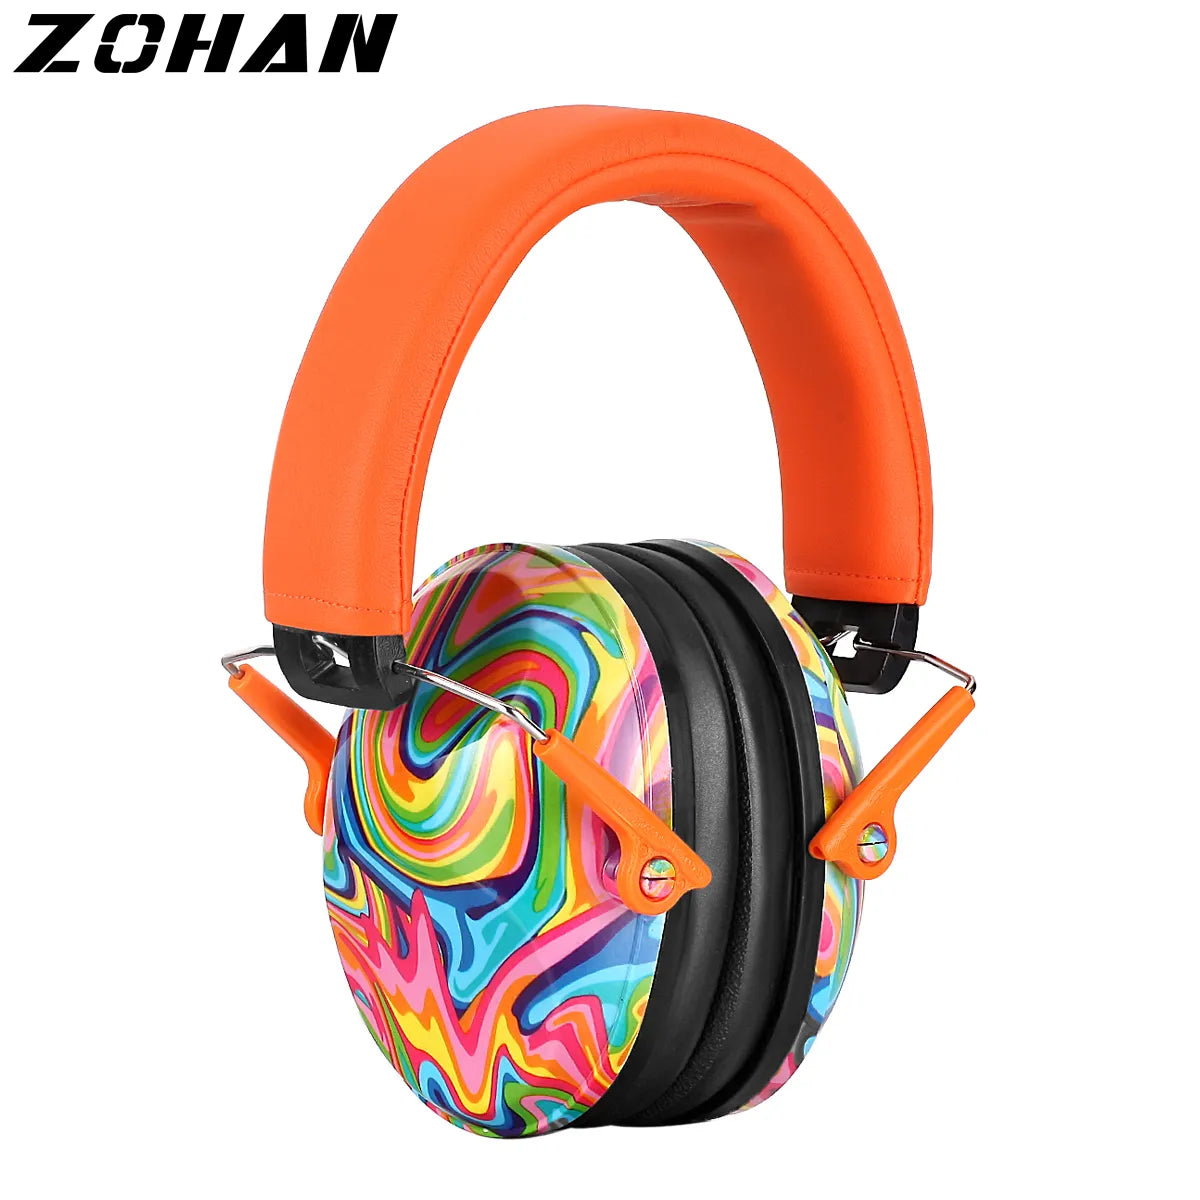 ZOHAN Kids Hearing Protection Baby Earmuffs Noise Reduction 25db Adjustable